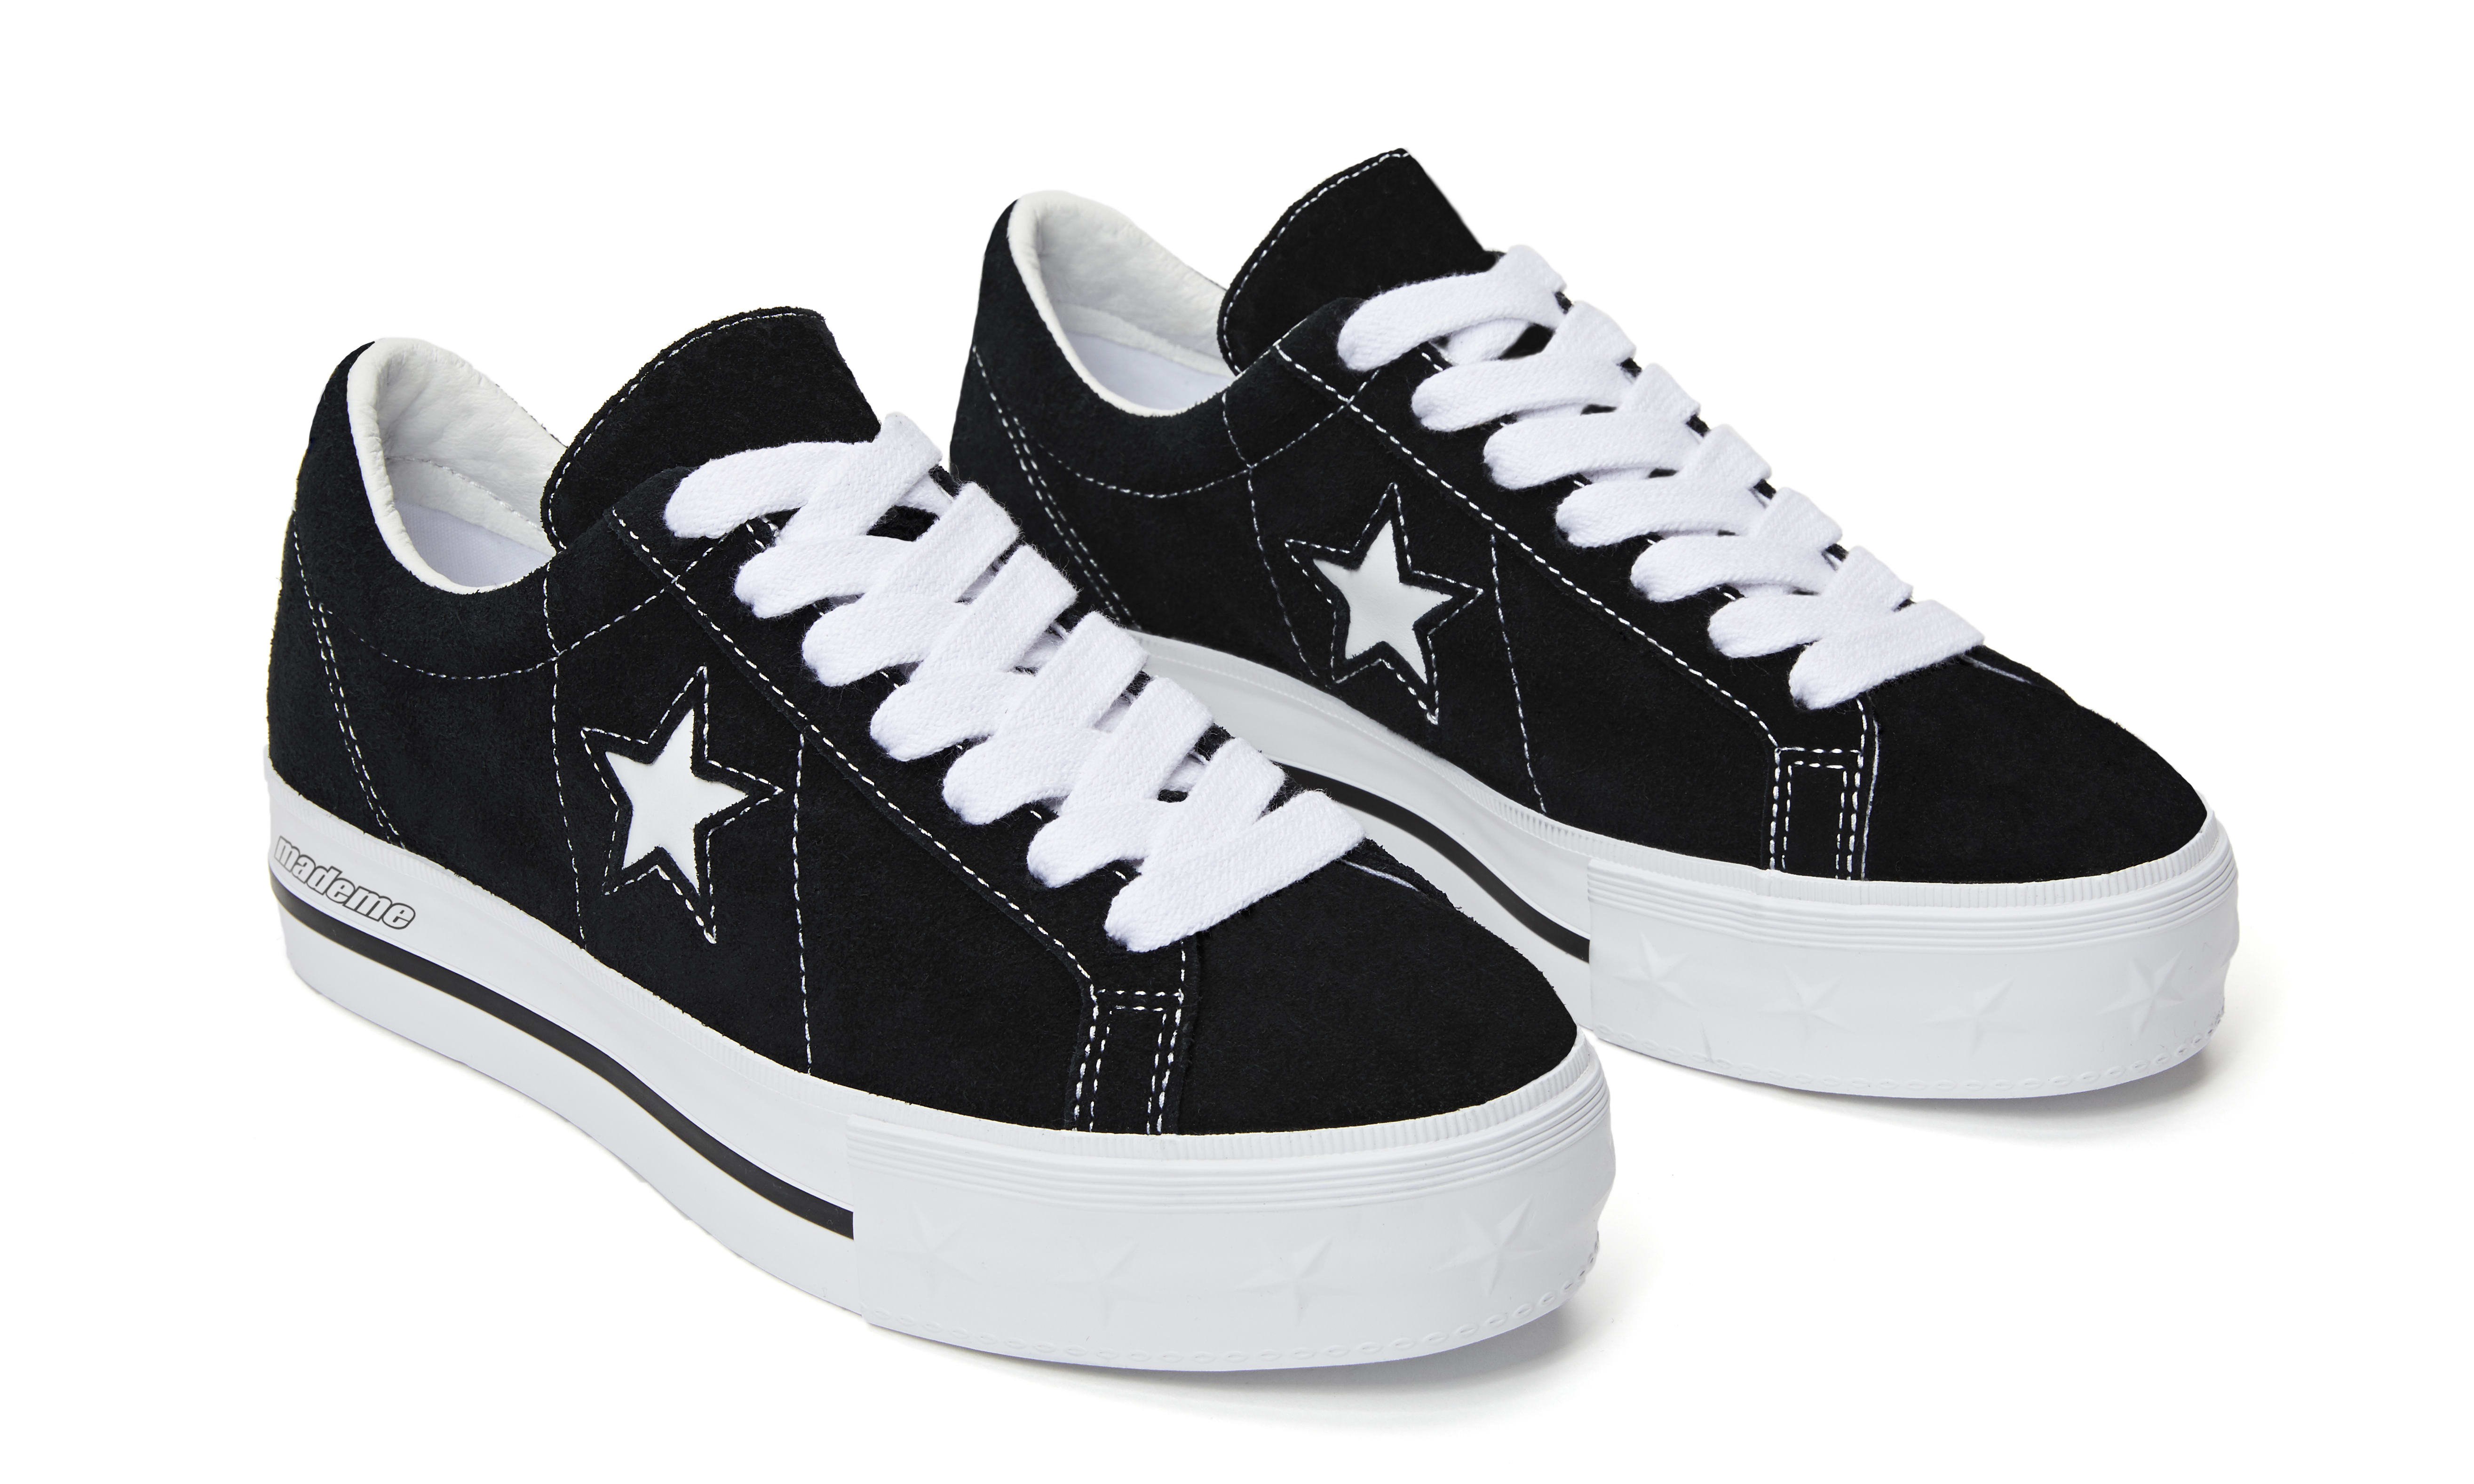 converse made me one star